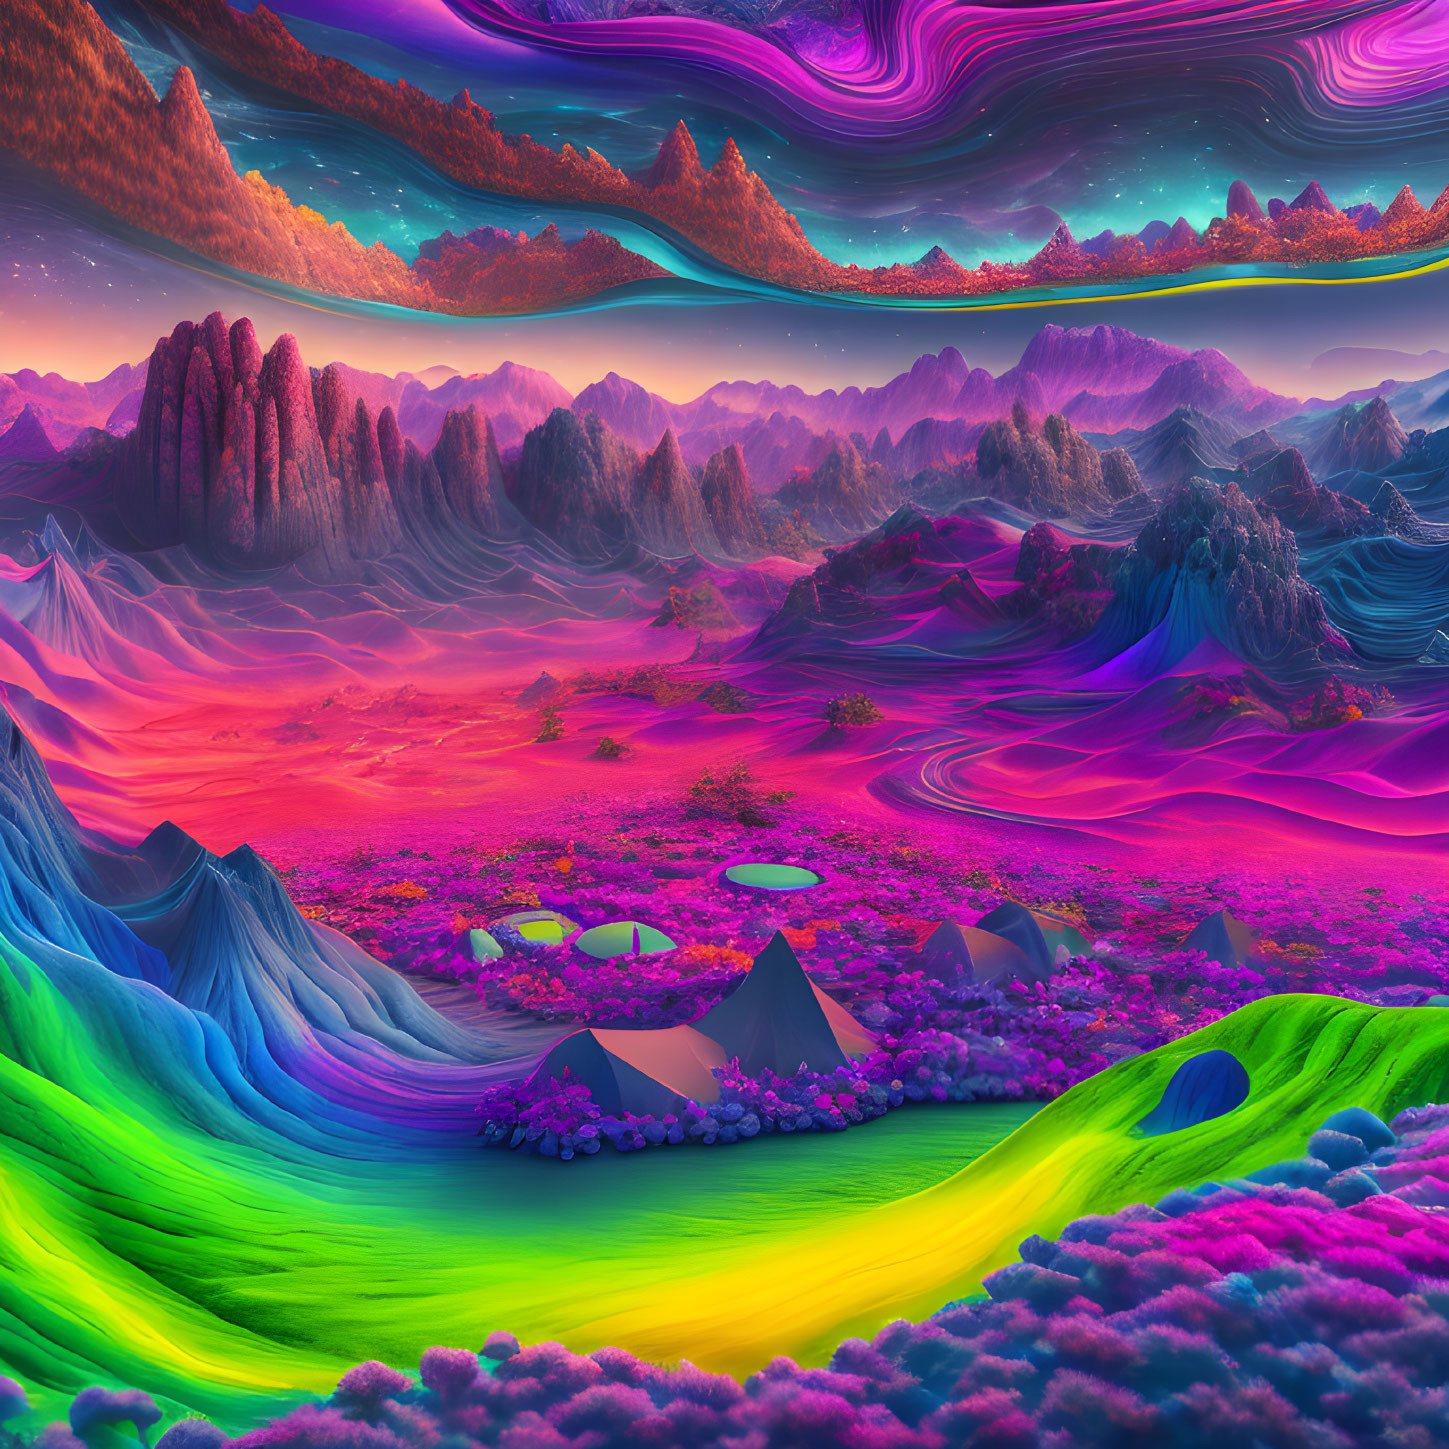 Colorful Neon Landscape with Surreal Mountains and Cosmic Skies